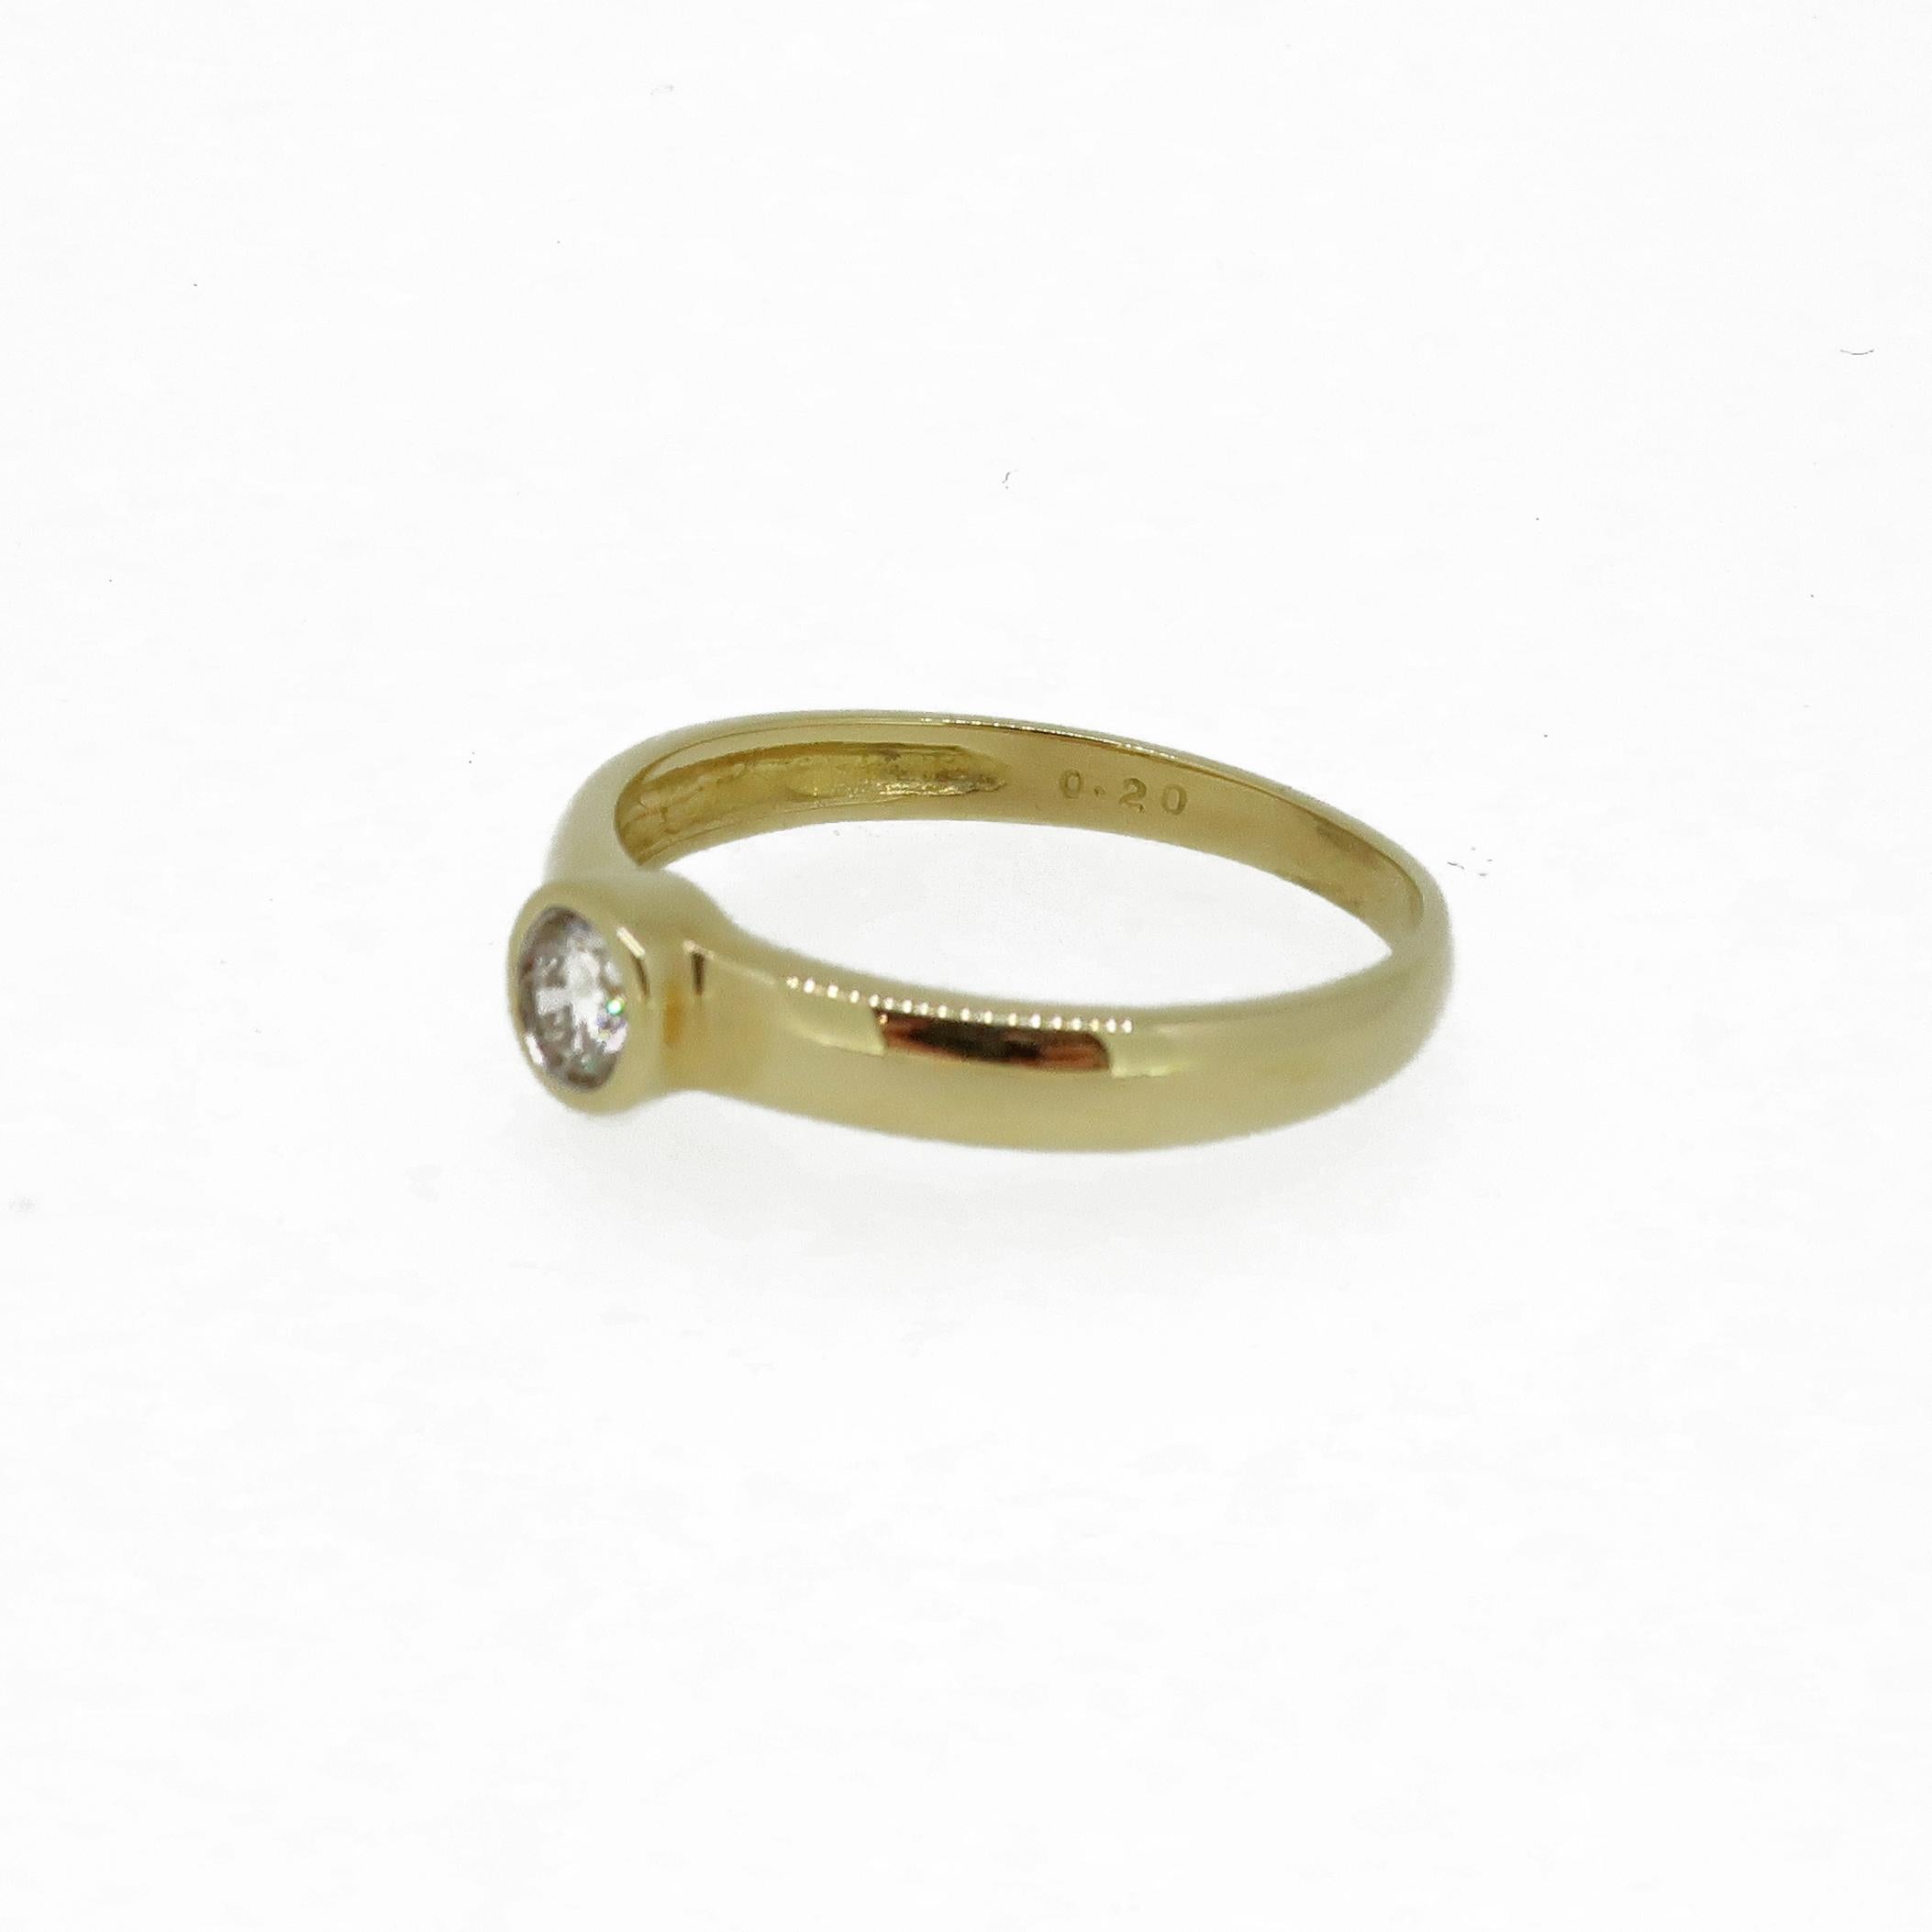 Diamond Solitaire Ring 18 Karat Yellow Gold

A delicate brilliant cut diamond solitaire ring. The round brilliant cut diamond encased in a rub over setting, on the band style shank all 18ct yellow gold. The shank is stamped with the diamond weight